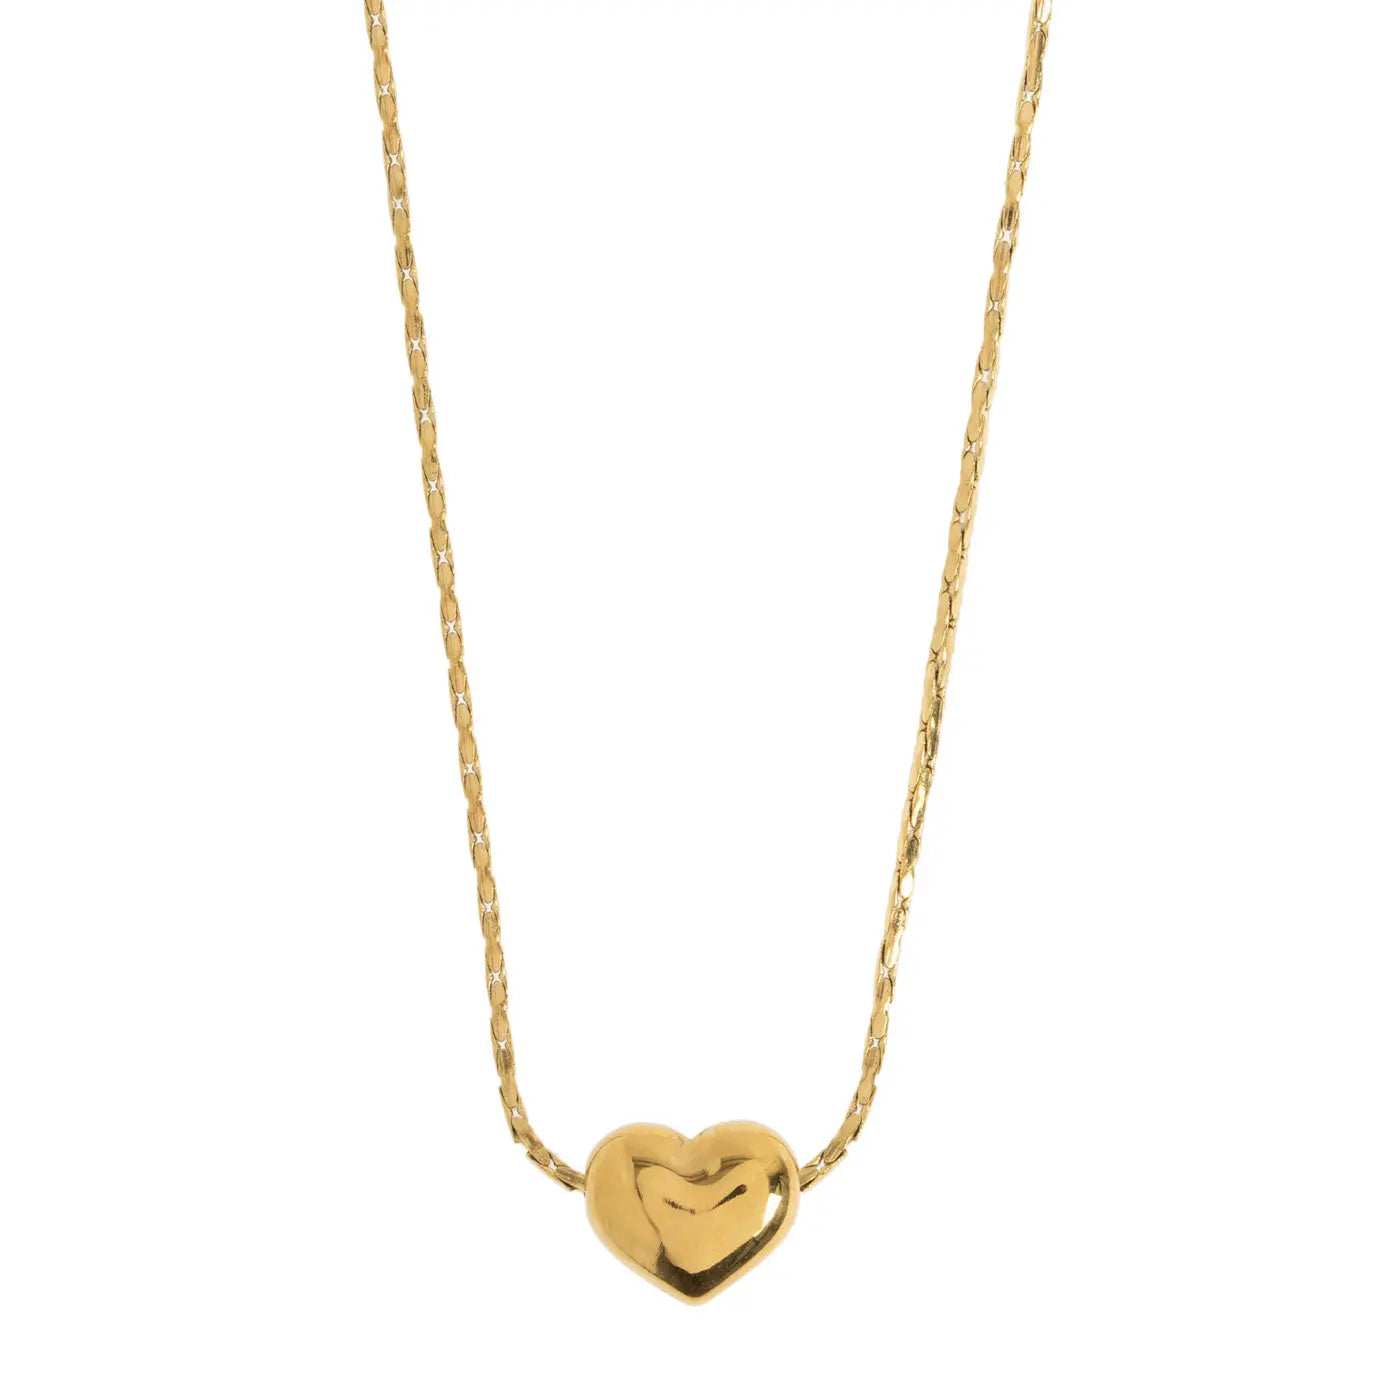 Sarah - Petite Heart Necklace Stainless Steel